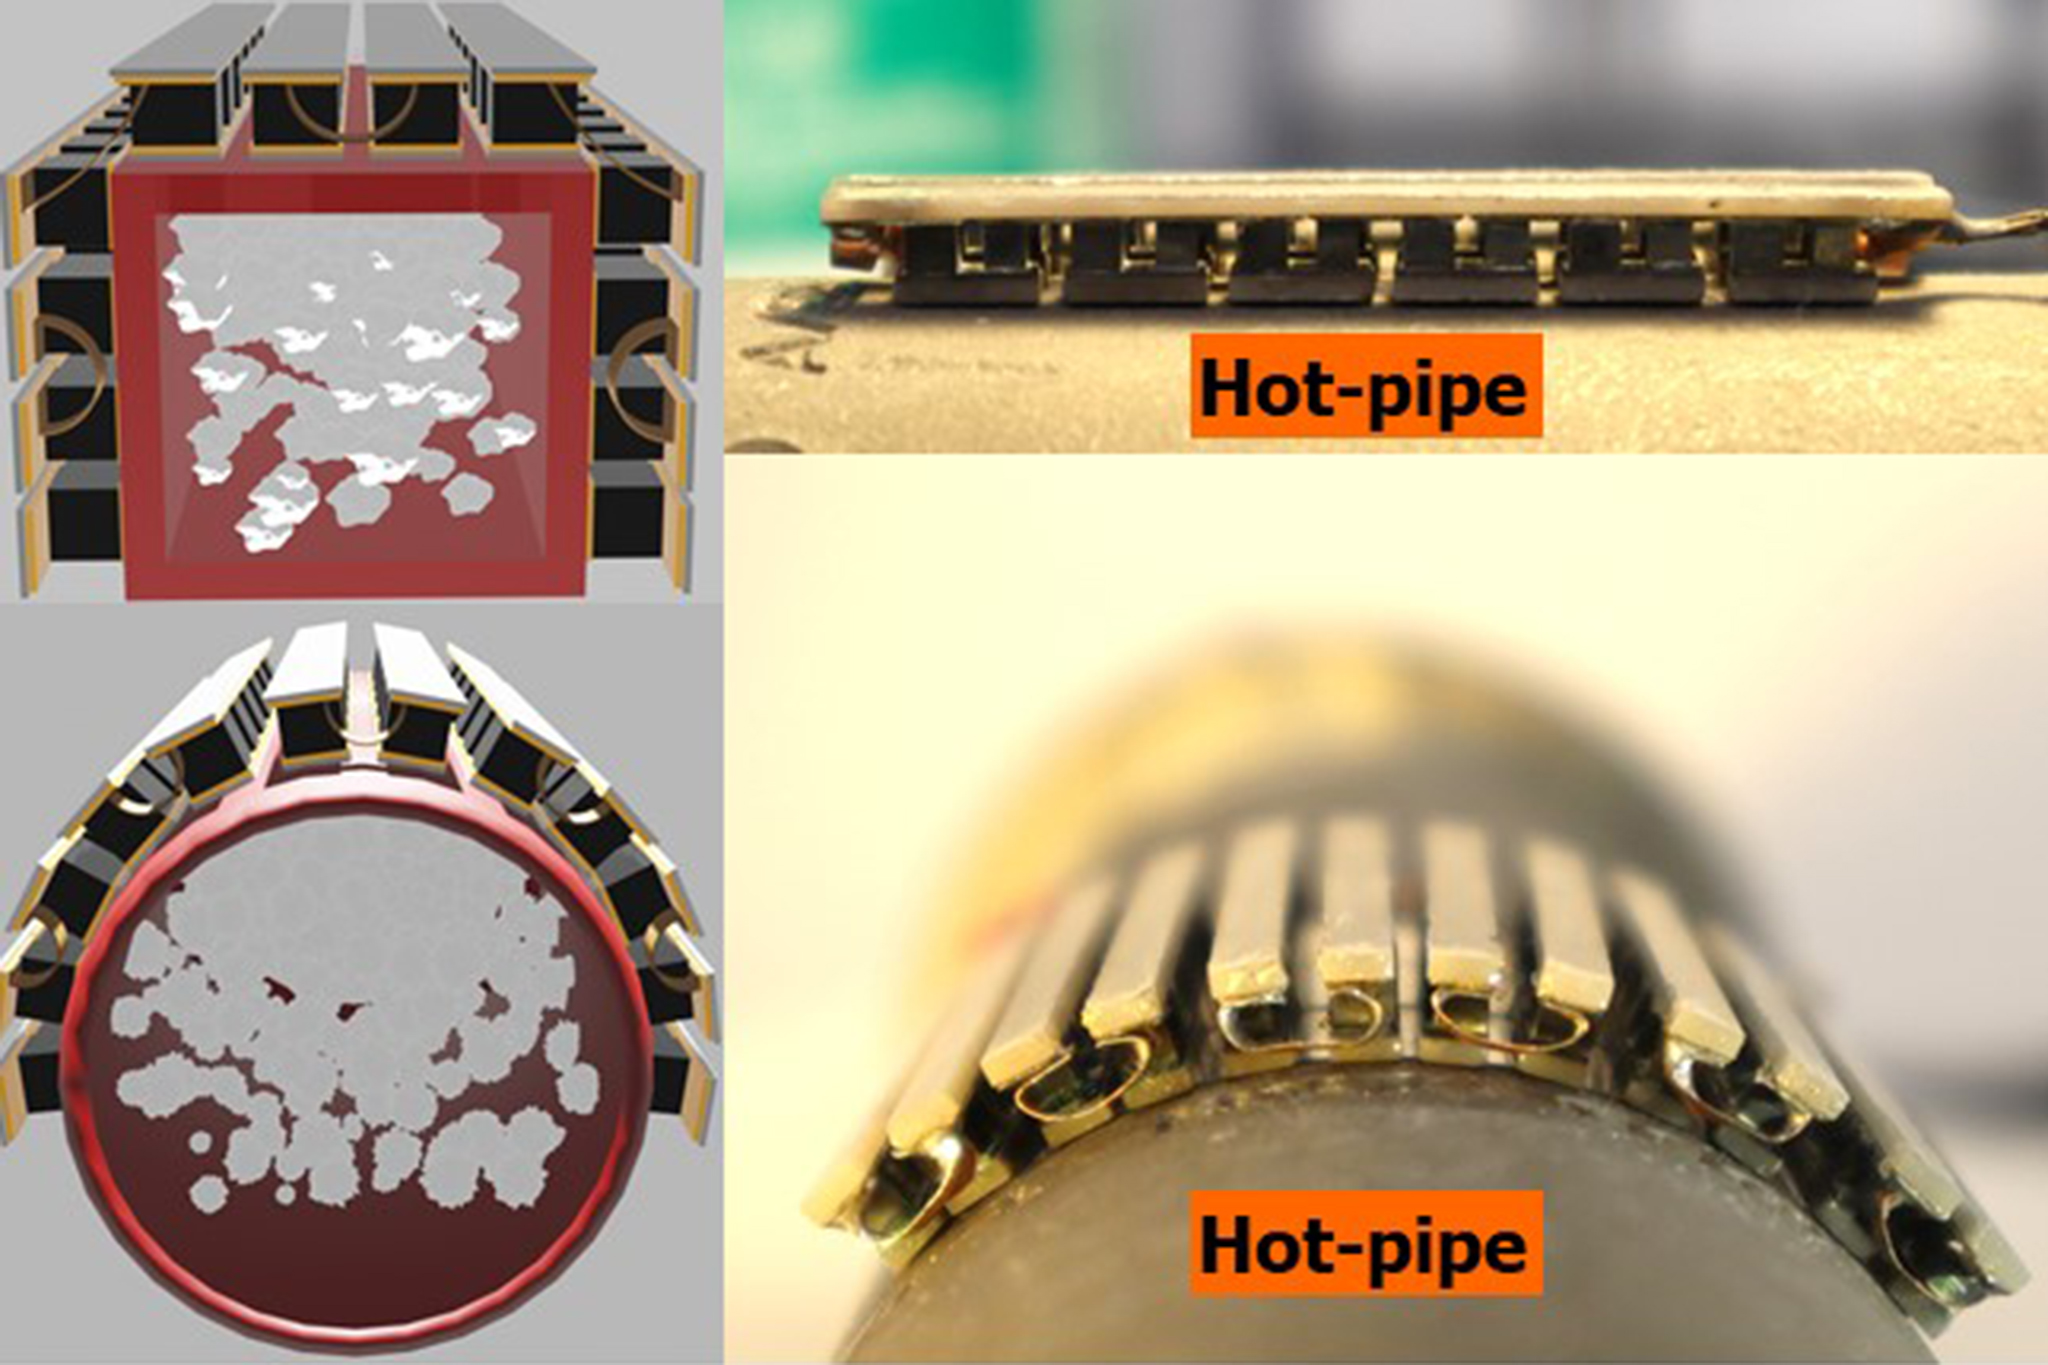 A new thermoelectric device developed by Penn State scientists better fits around pipes and other hot surfaces and converts wasted heat into electricity